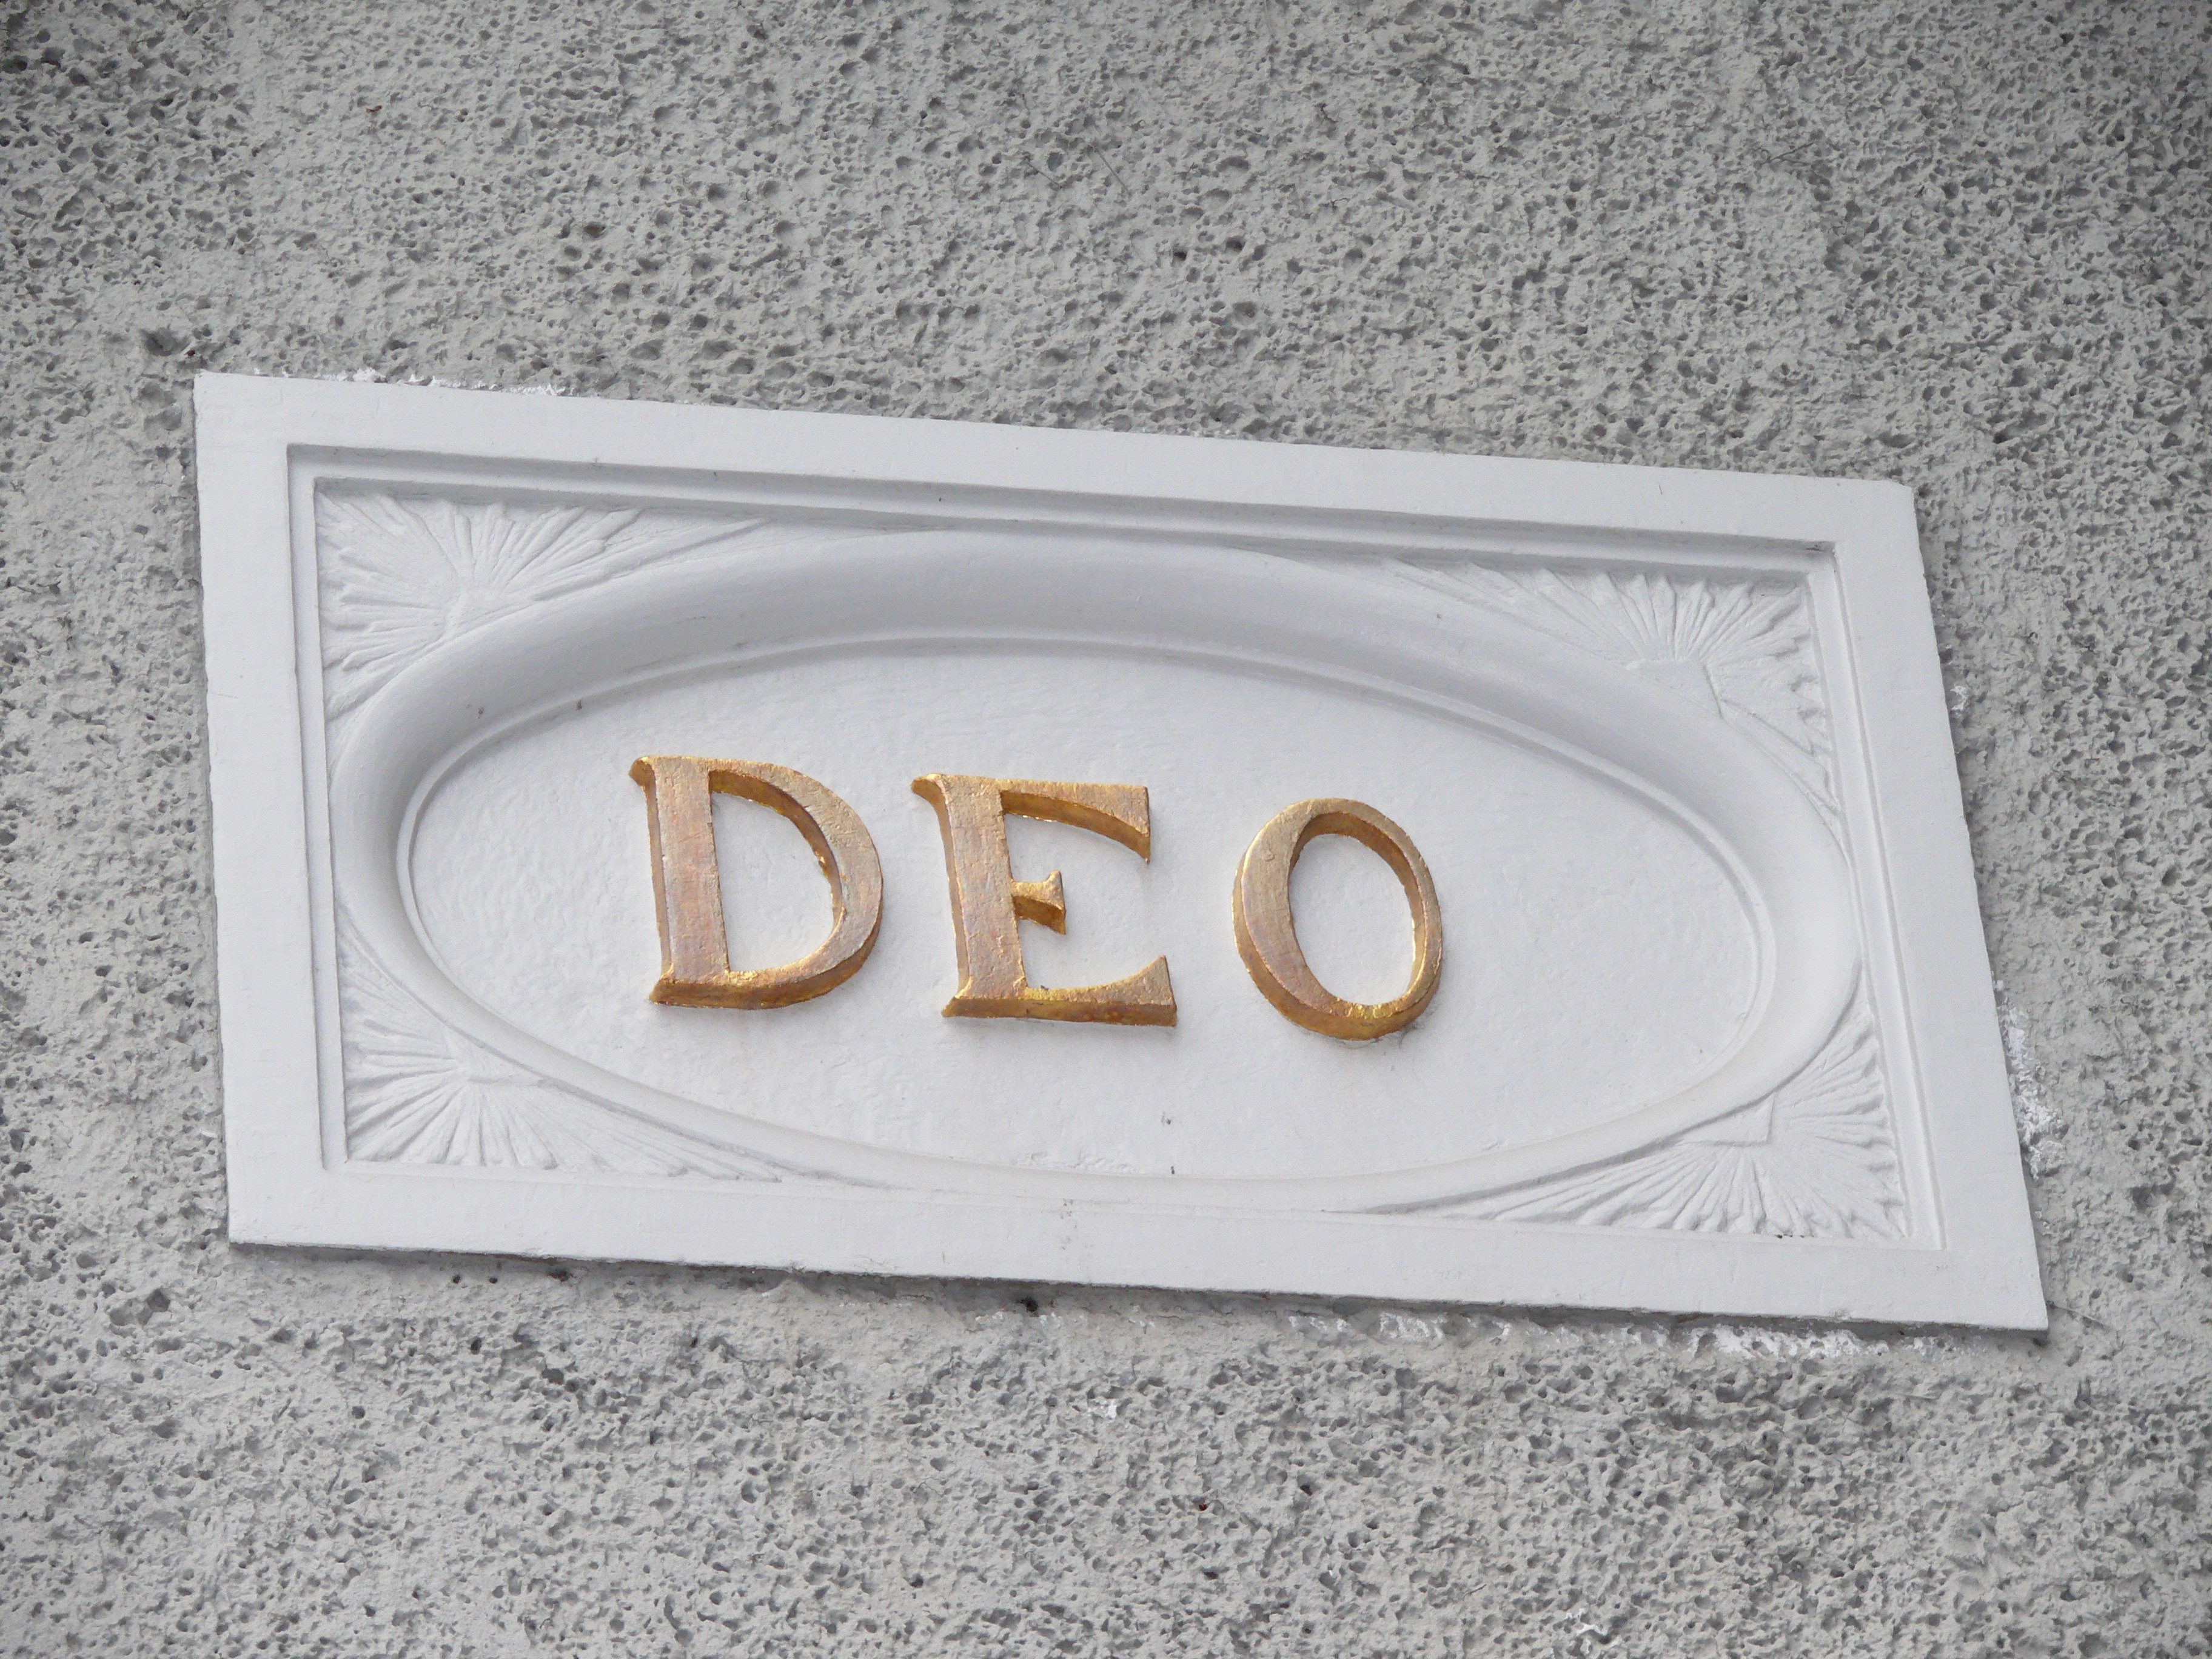 white and abrown deo wooden signage